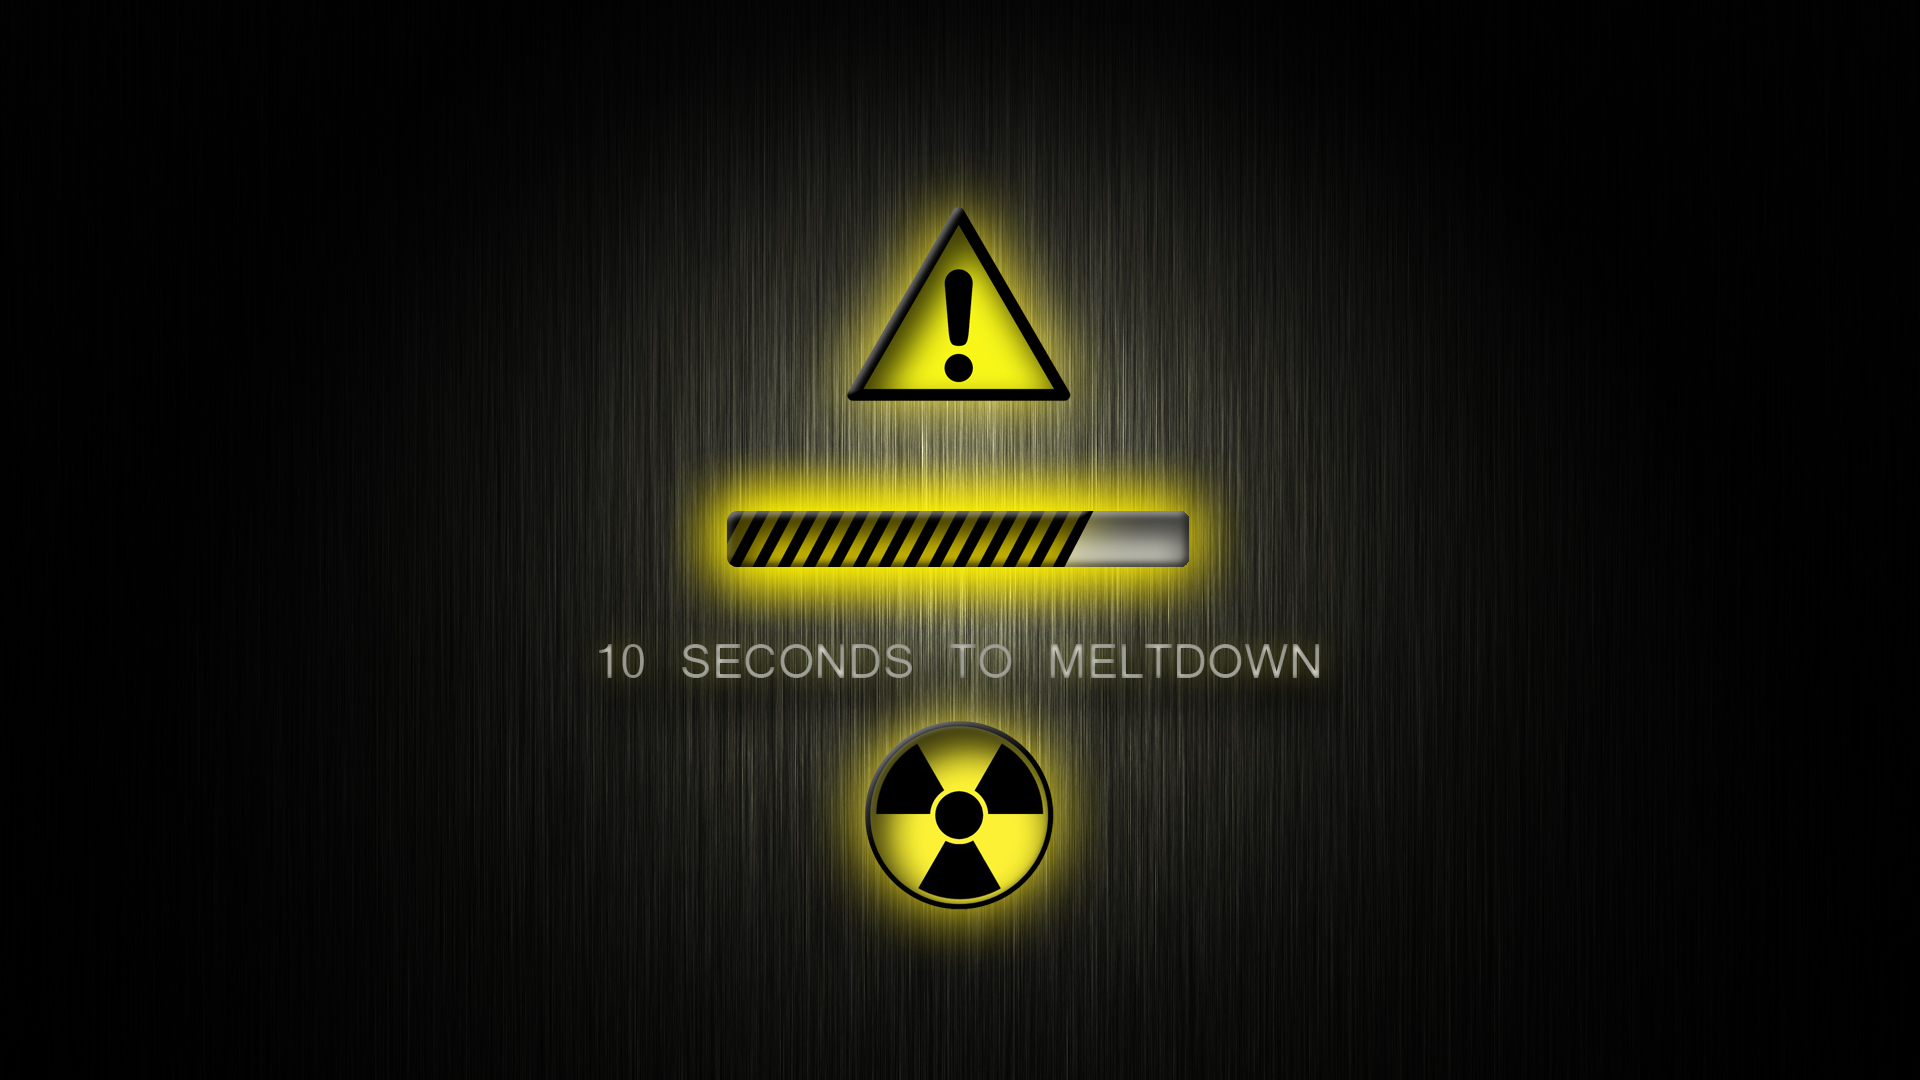 meltdown Warning Nuclear Radiation Text Humor Funny Sci fi